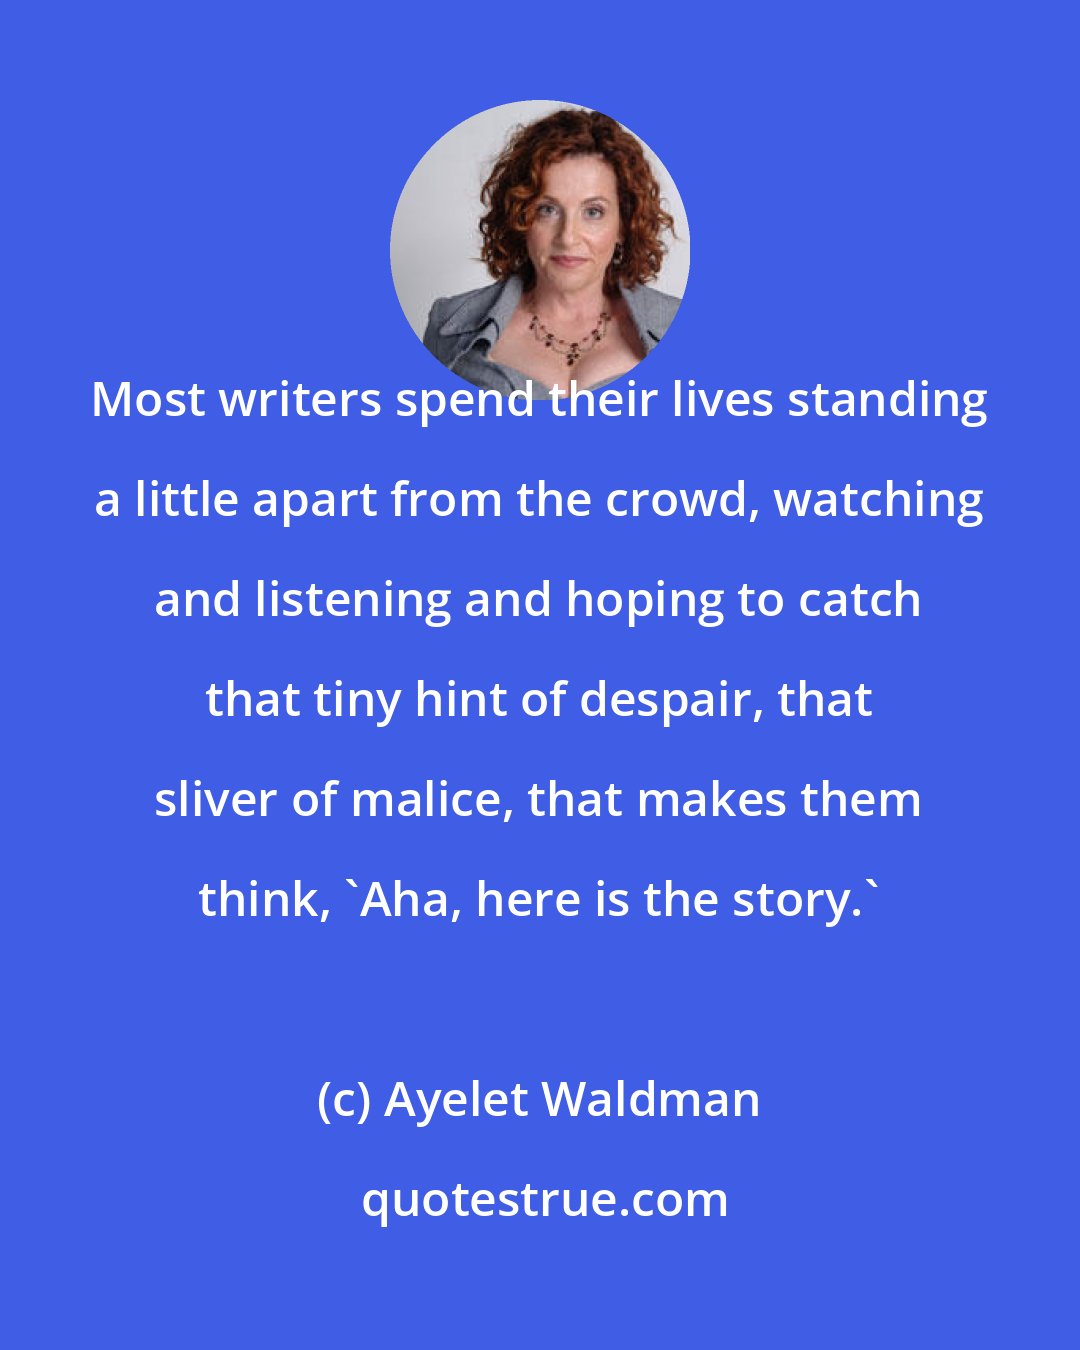 Ayelet Waldman: Most writers spend their lives standing a little apart from the crowd, watching and listening and hoping to catch that tiny hint of despair, that sliver of malice, that makes them think, 'Aha, here is the story.'